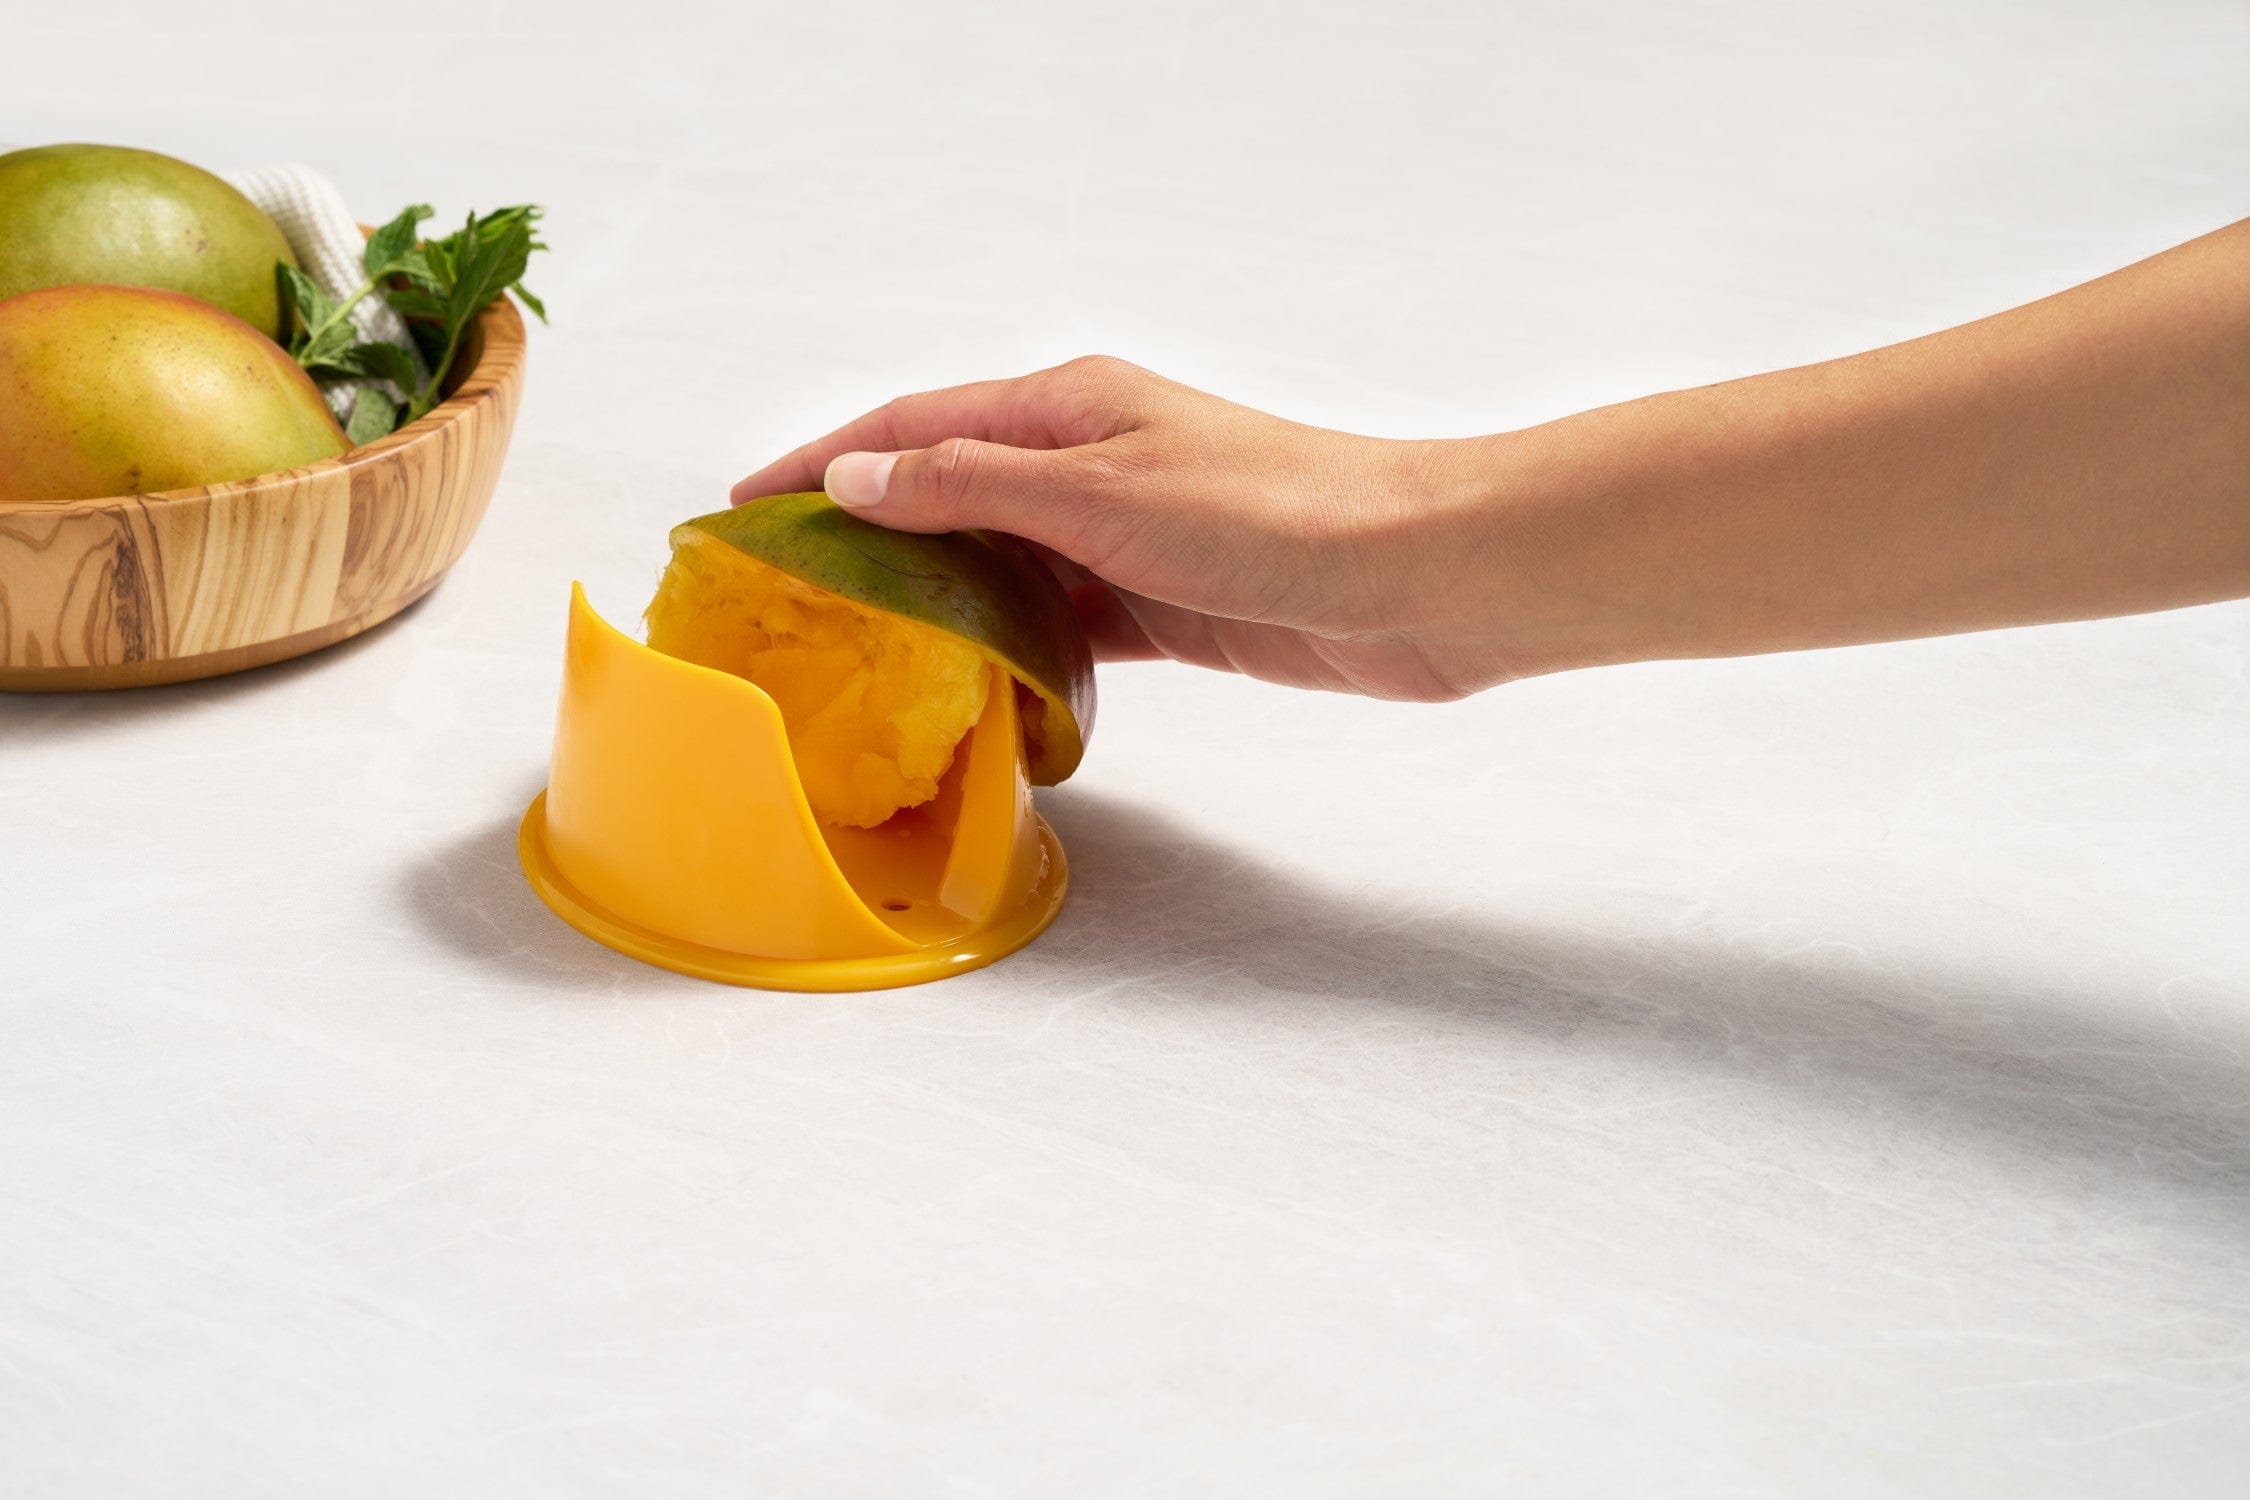 Slice & Peel 3-in-1 Mango Slicer, Peeler and Pit Remover Tool